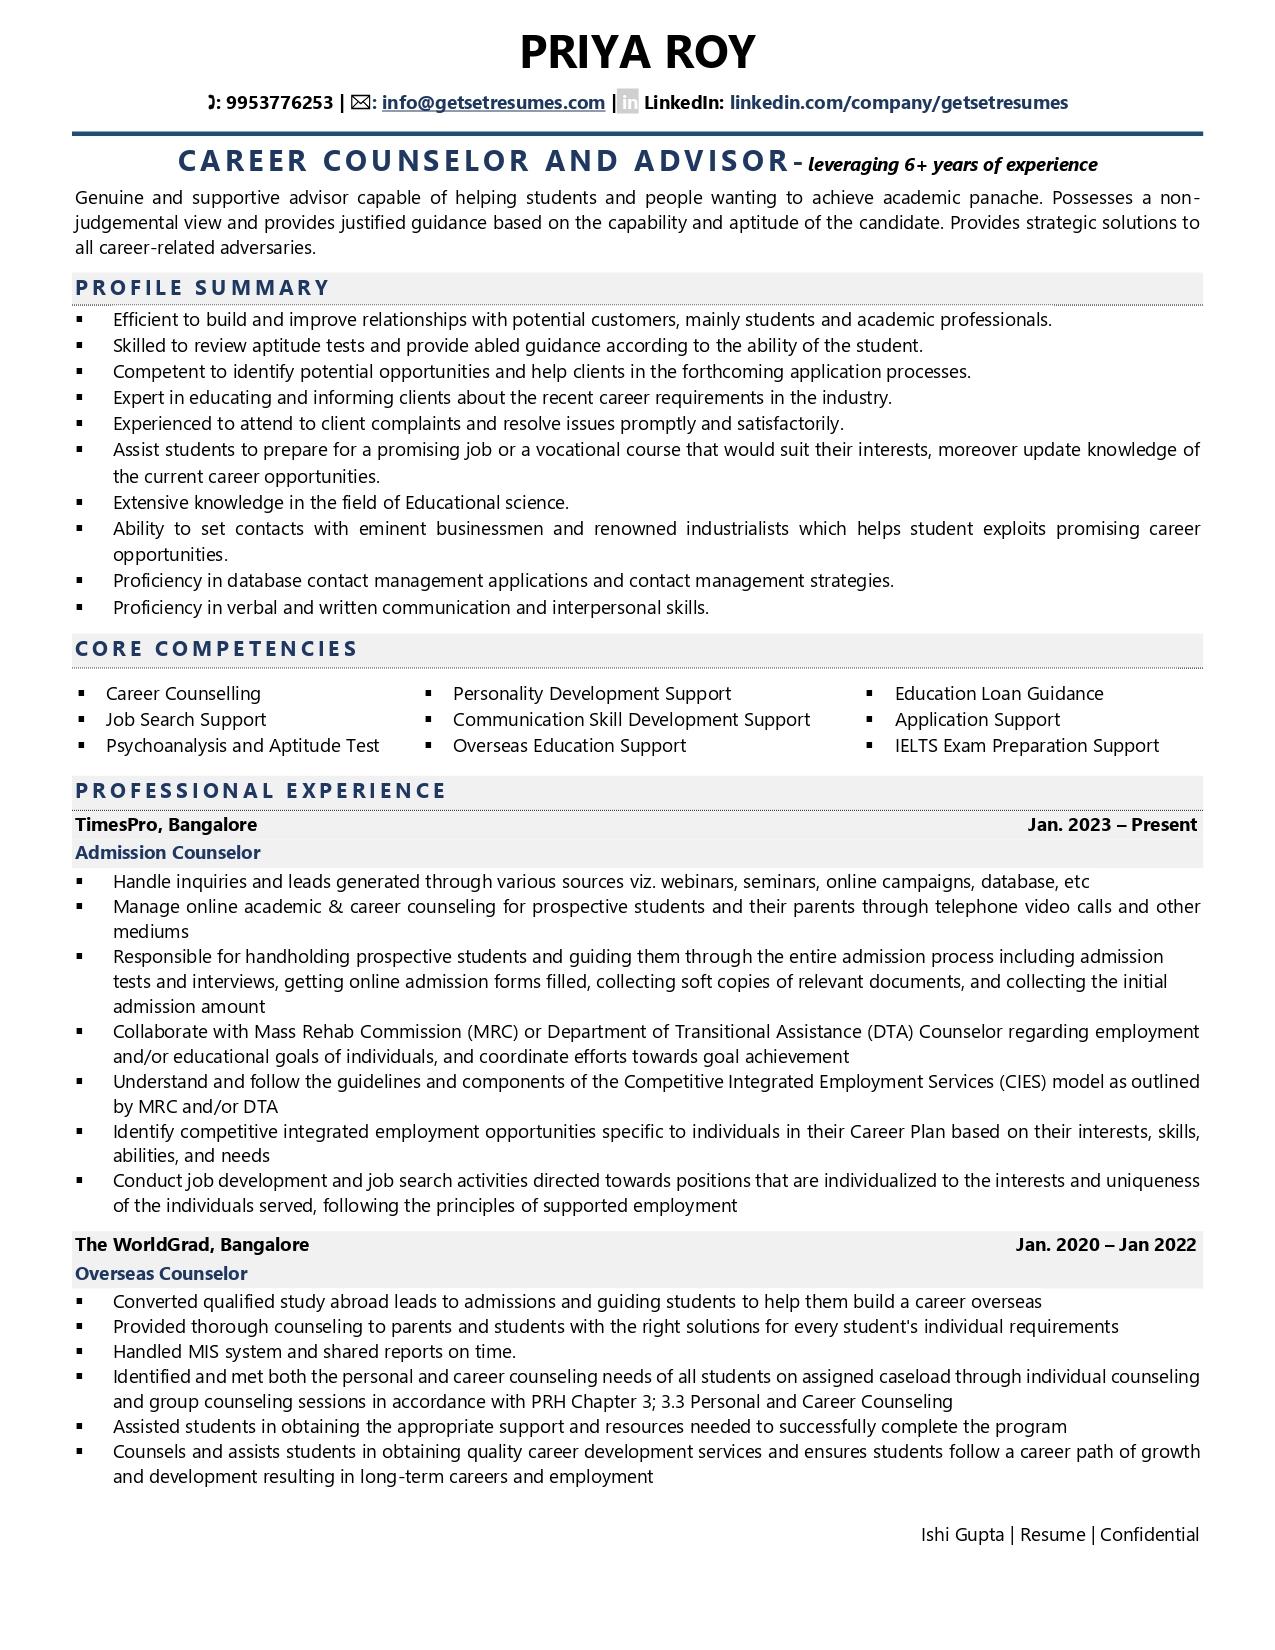 Career Counselor and Advisor Resume Examples Template (with job